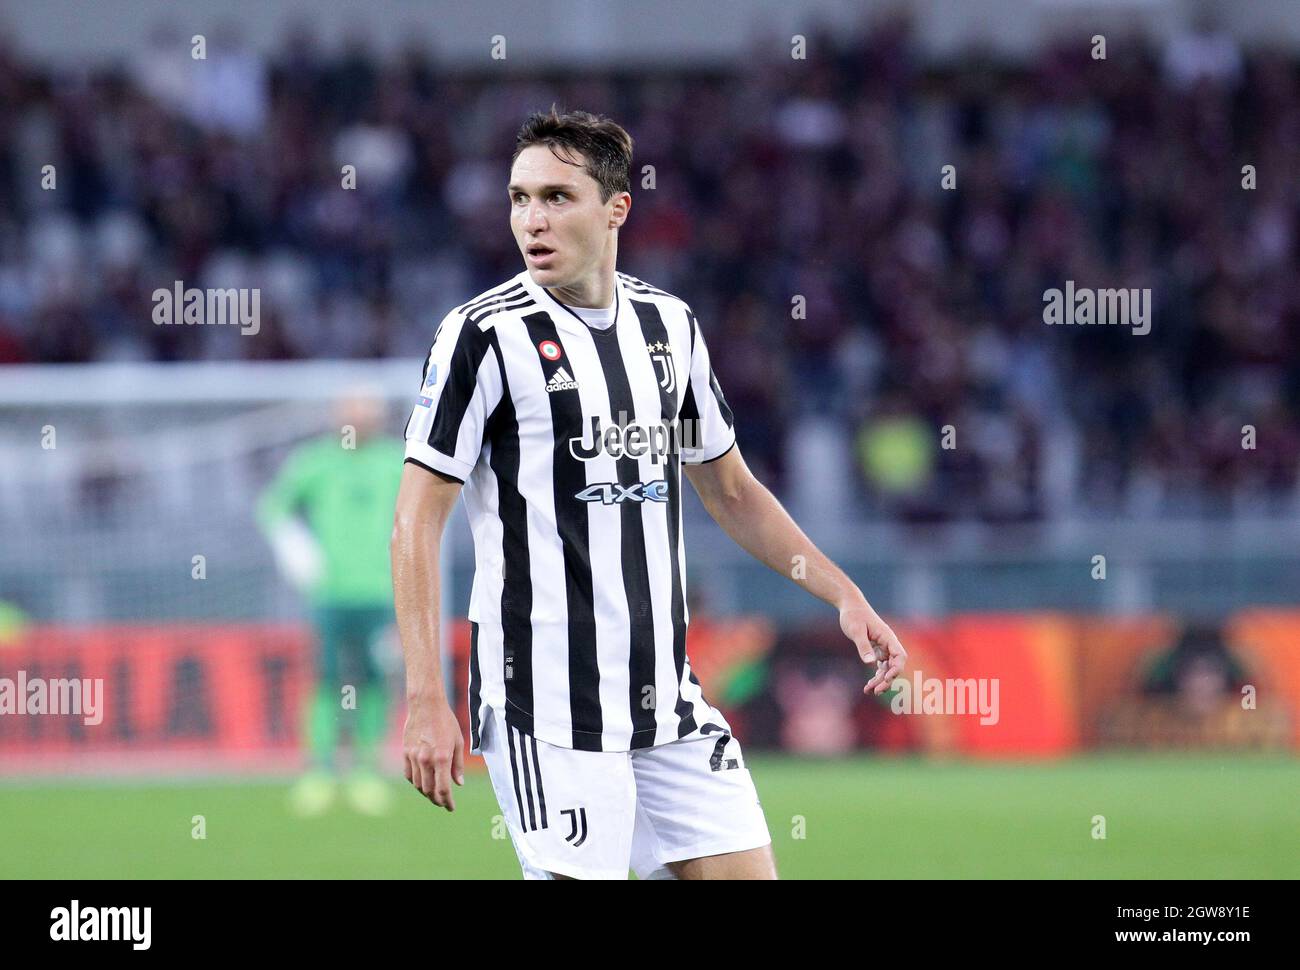 TORINO ITALY- October 2  Stadio Olimpico Grande Torino Federico Chiesa portrait during the Serie A match between Fc  Torino and Juventus Fc at Stadio Olimpico on October 2, 2021 in Torino, Italy. Credit: Christian Santi/Alamy Live News Stock Photo